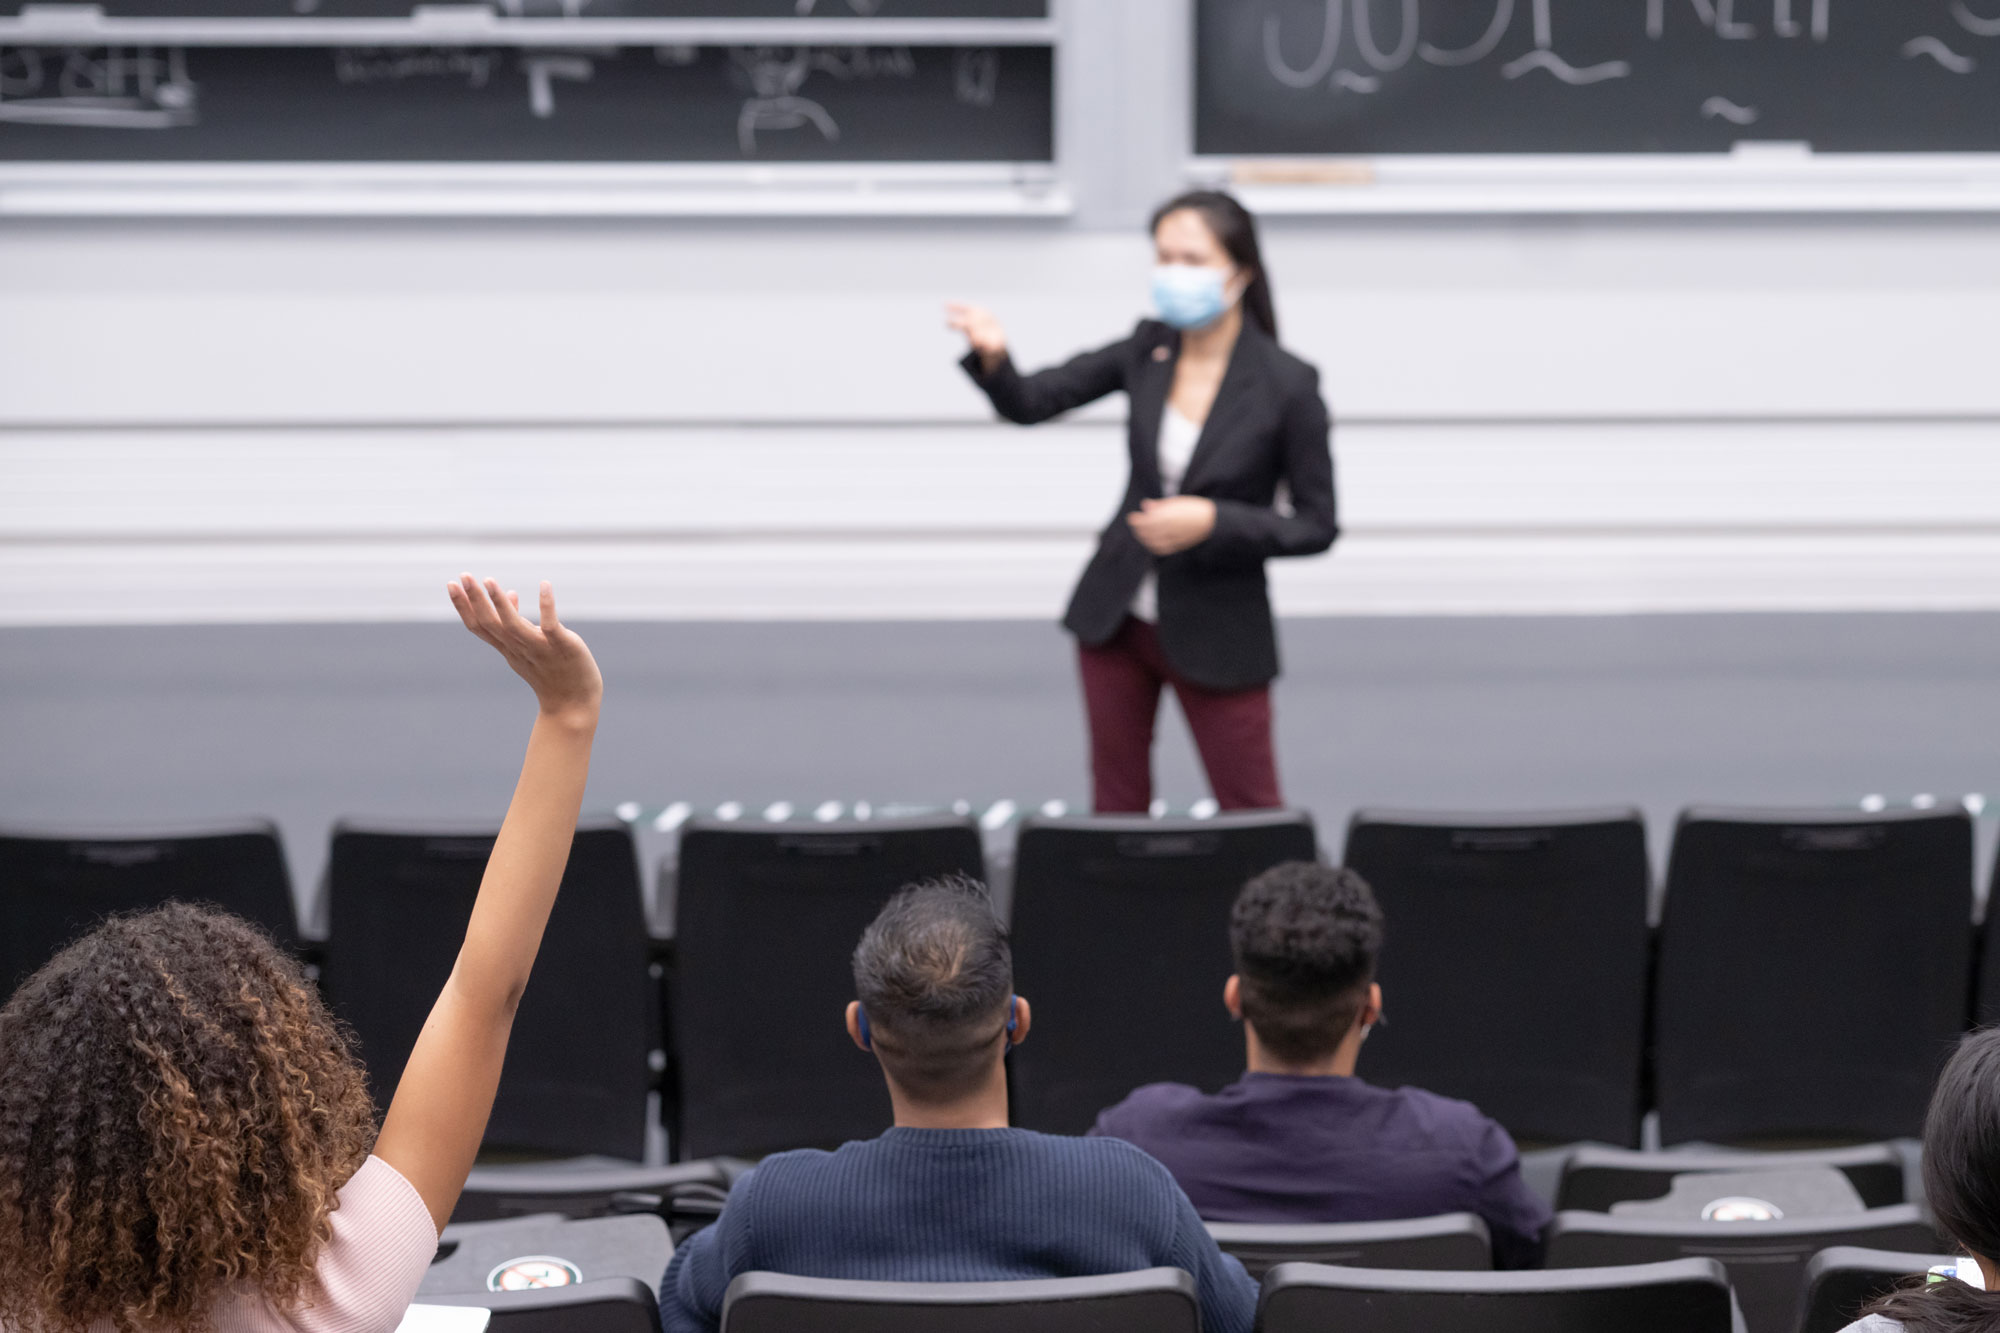 photo - Professor Wearing Mask and Lecturing to Students